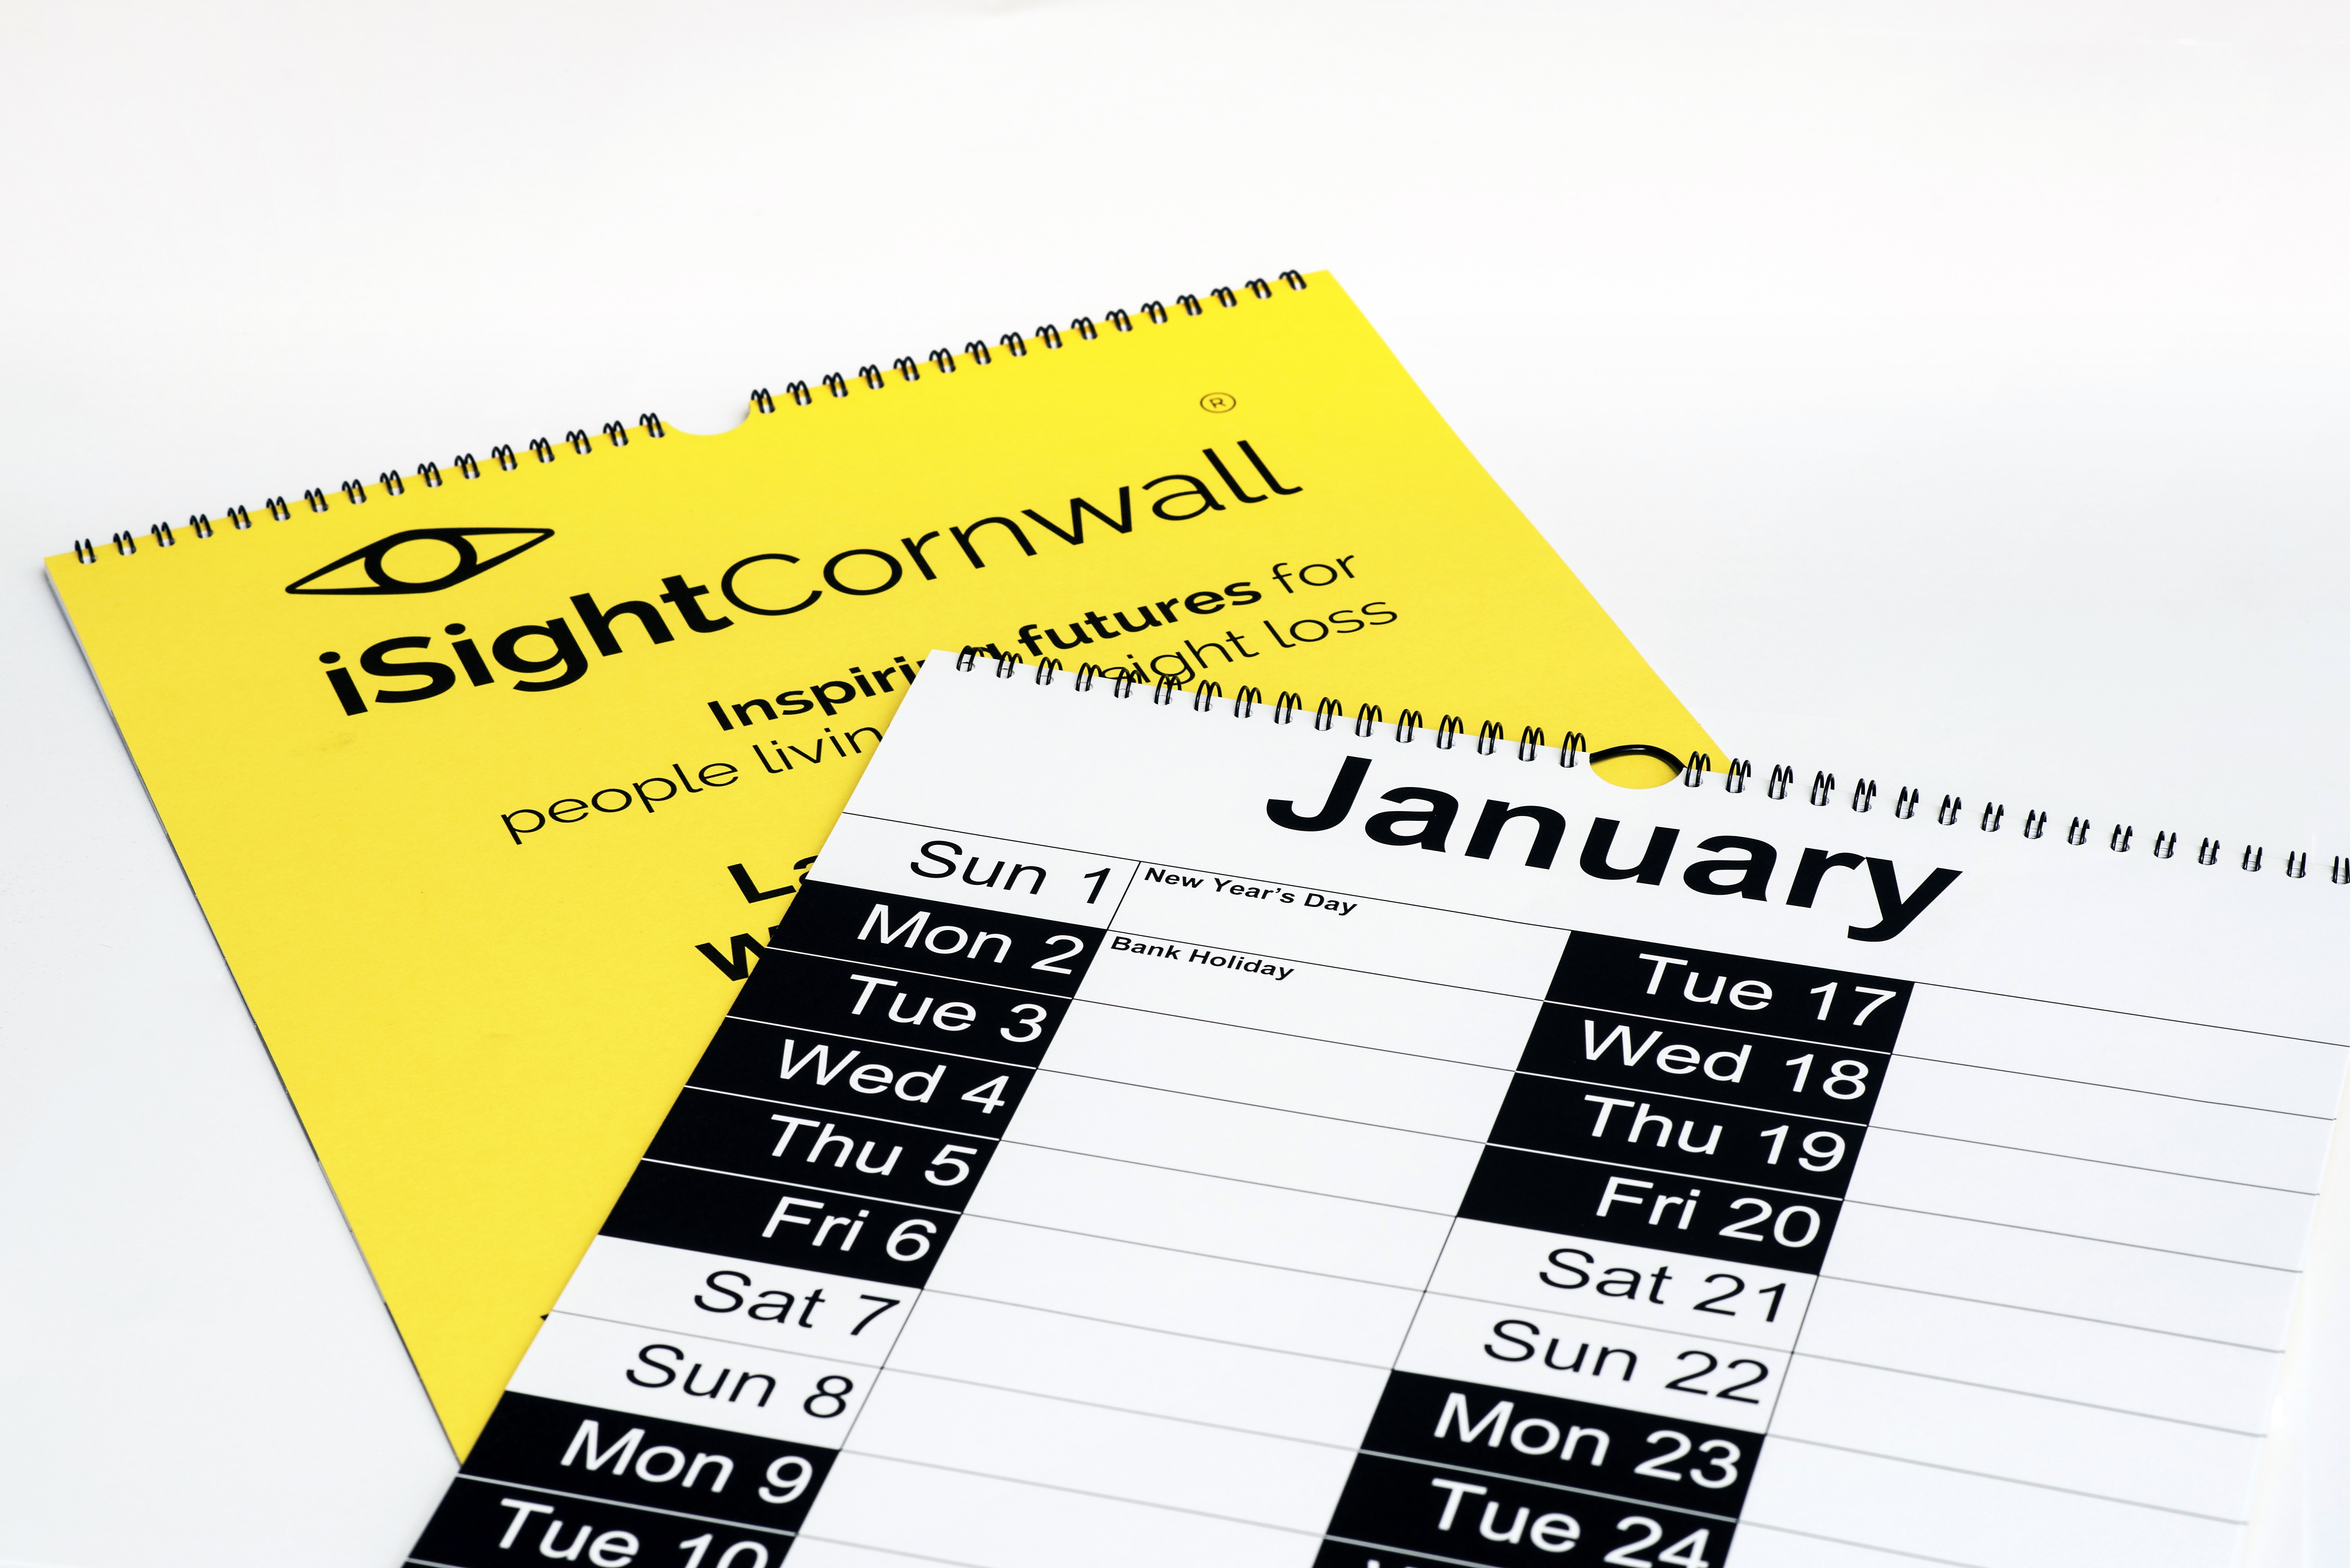 large-print-easy-to-see-wall-calendar-for-the-visually-impaired